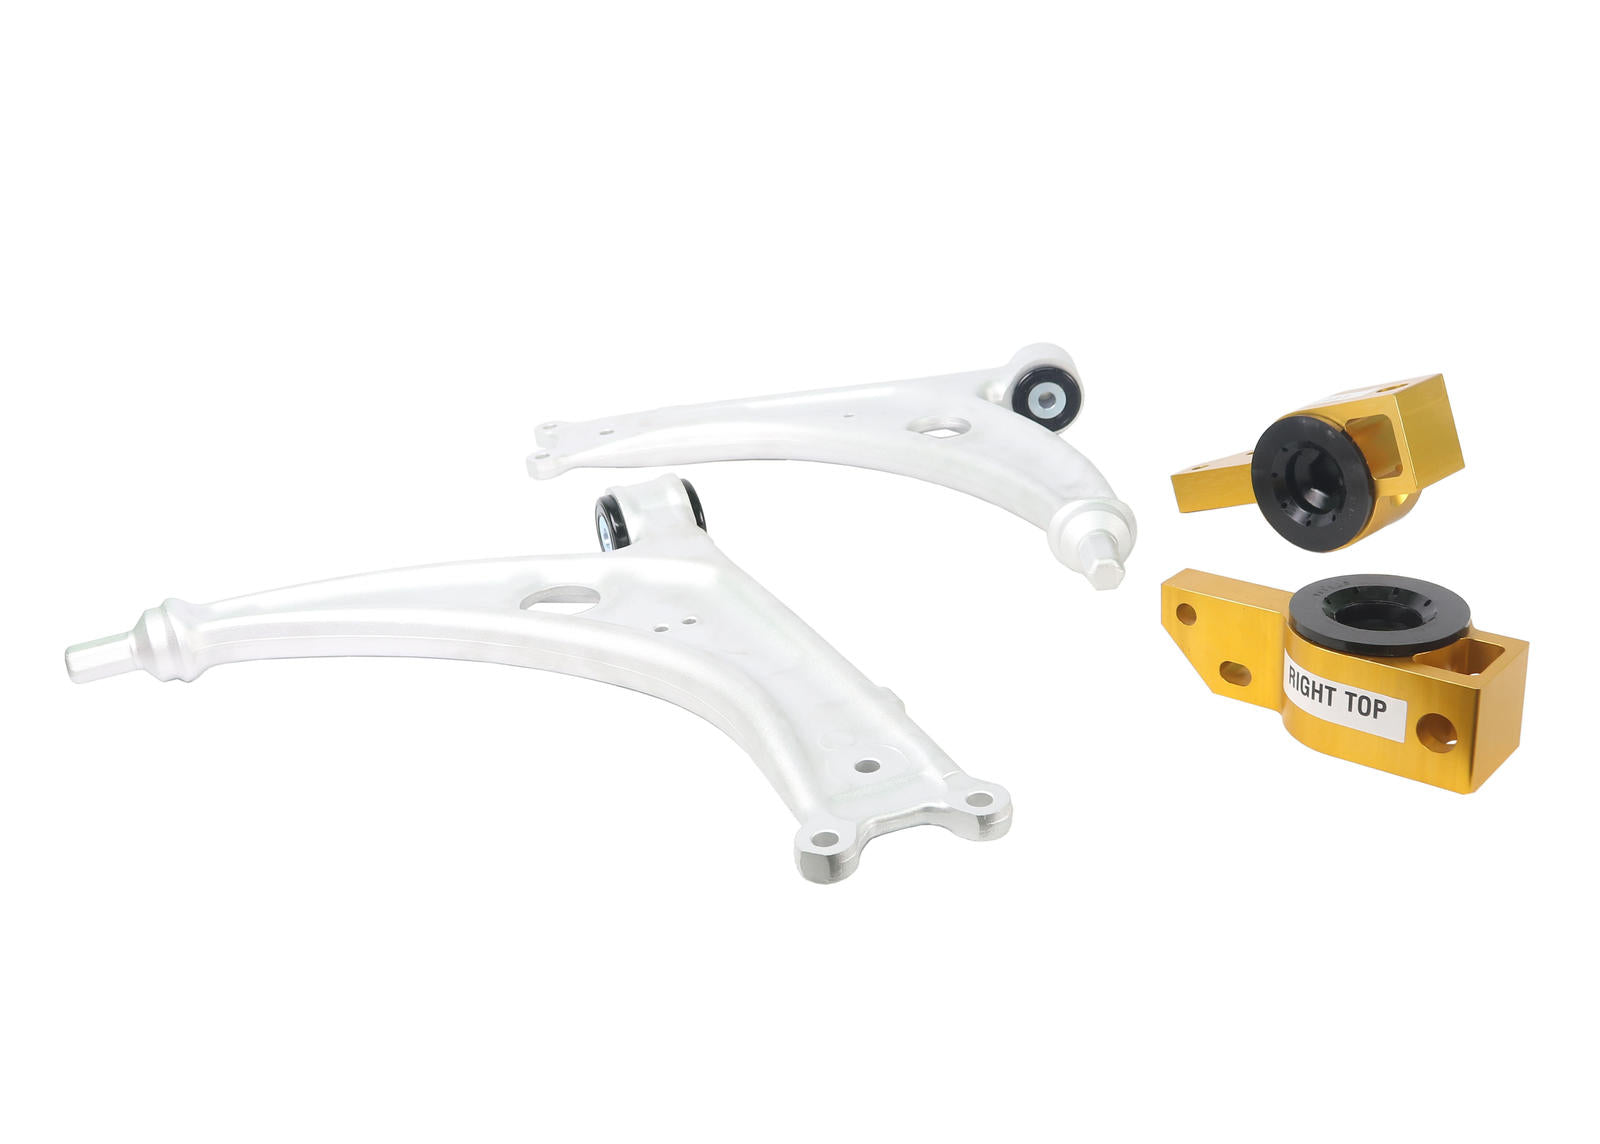 Front Control Arm Lower - Arm To Suit Audi, Seat, Skoda And Volkswagen PQ35 Fwd/Awd